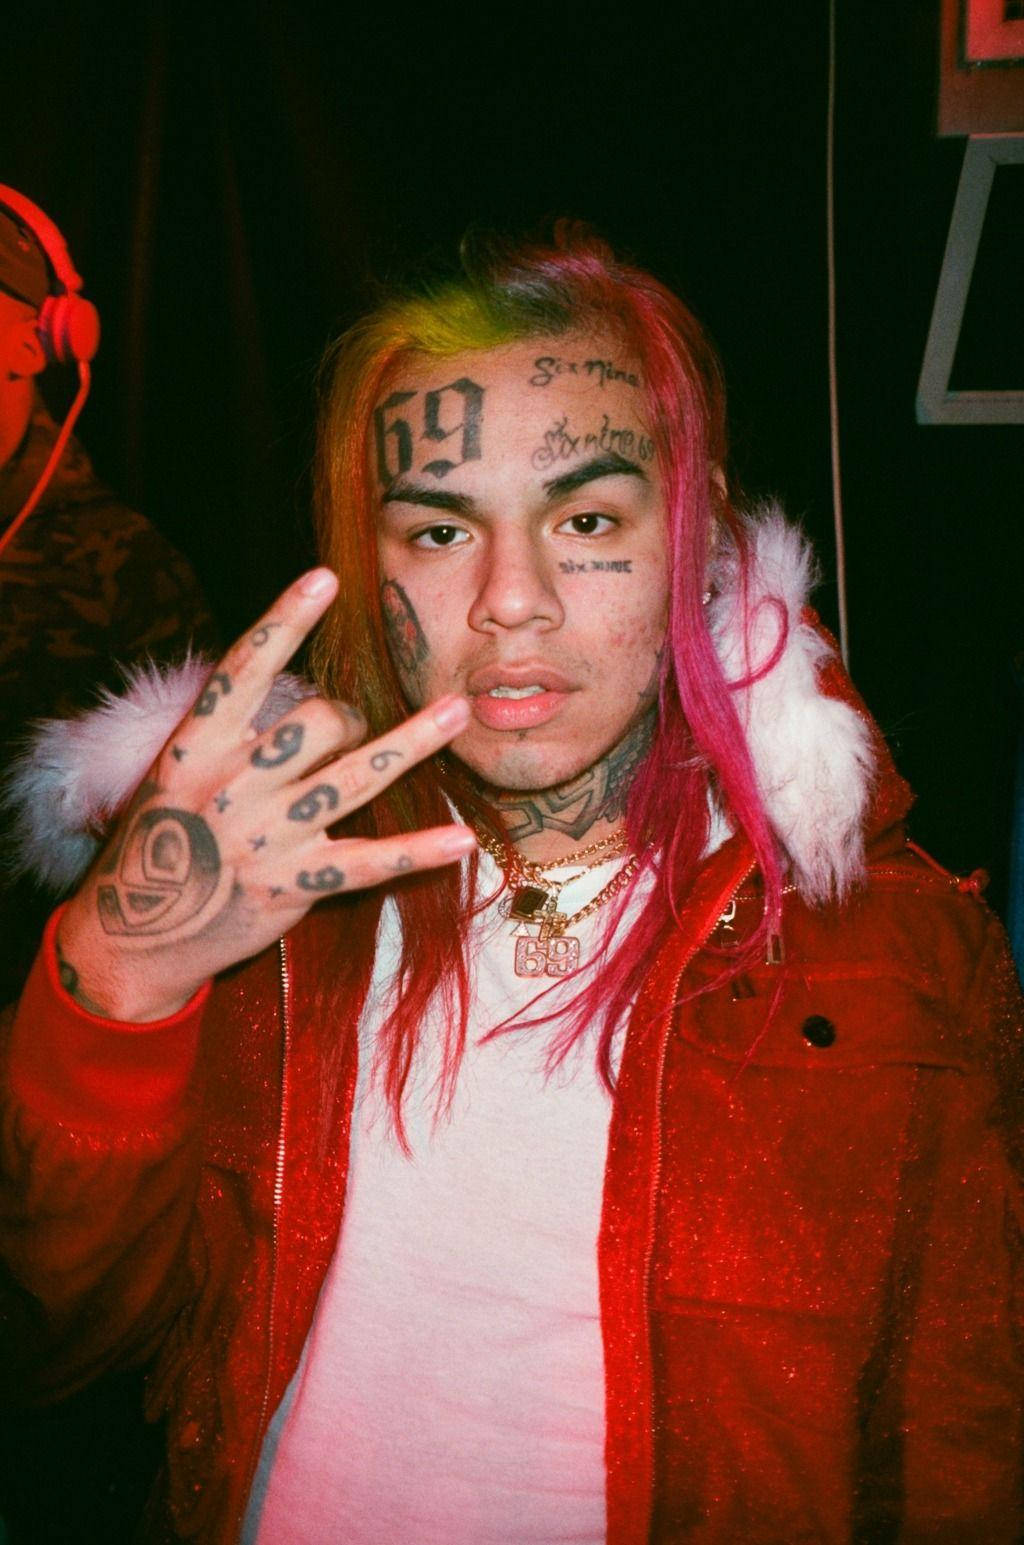 6ix9ine Red Outfit